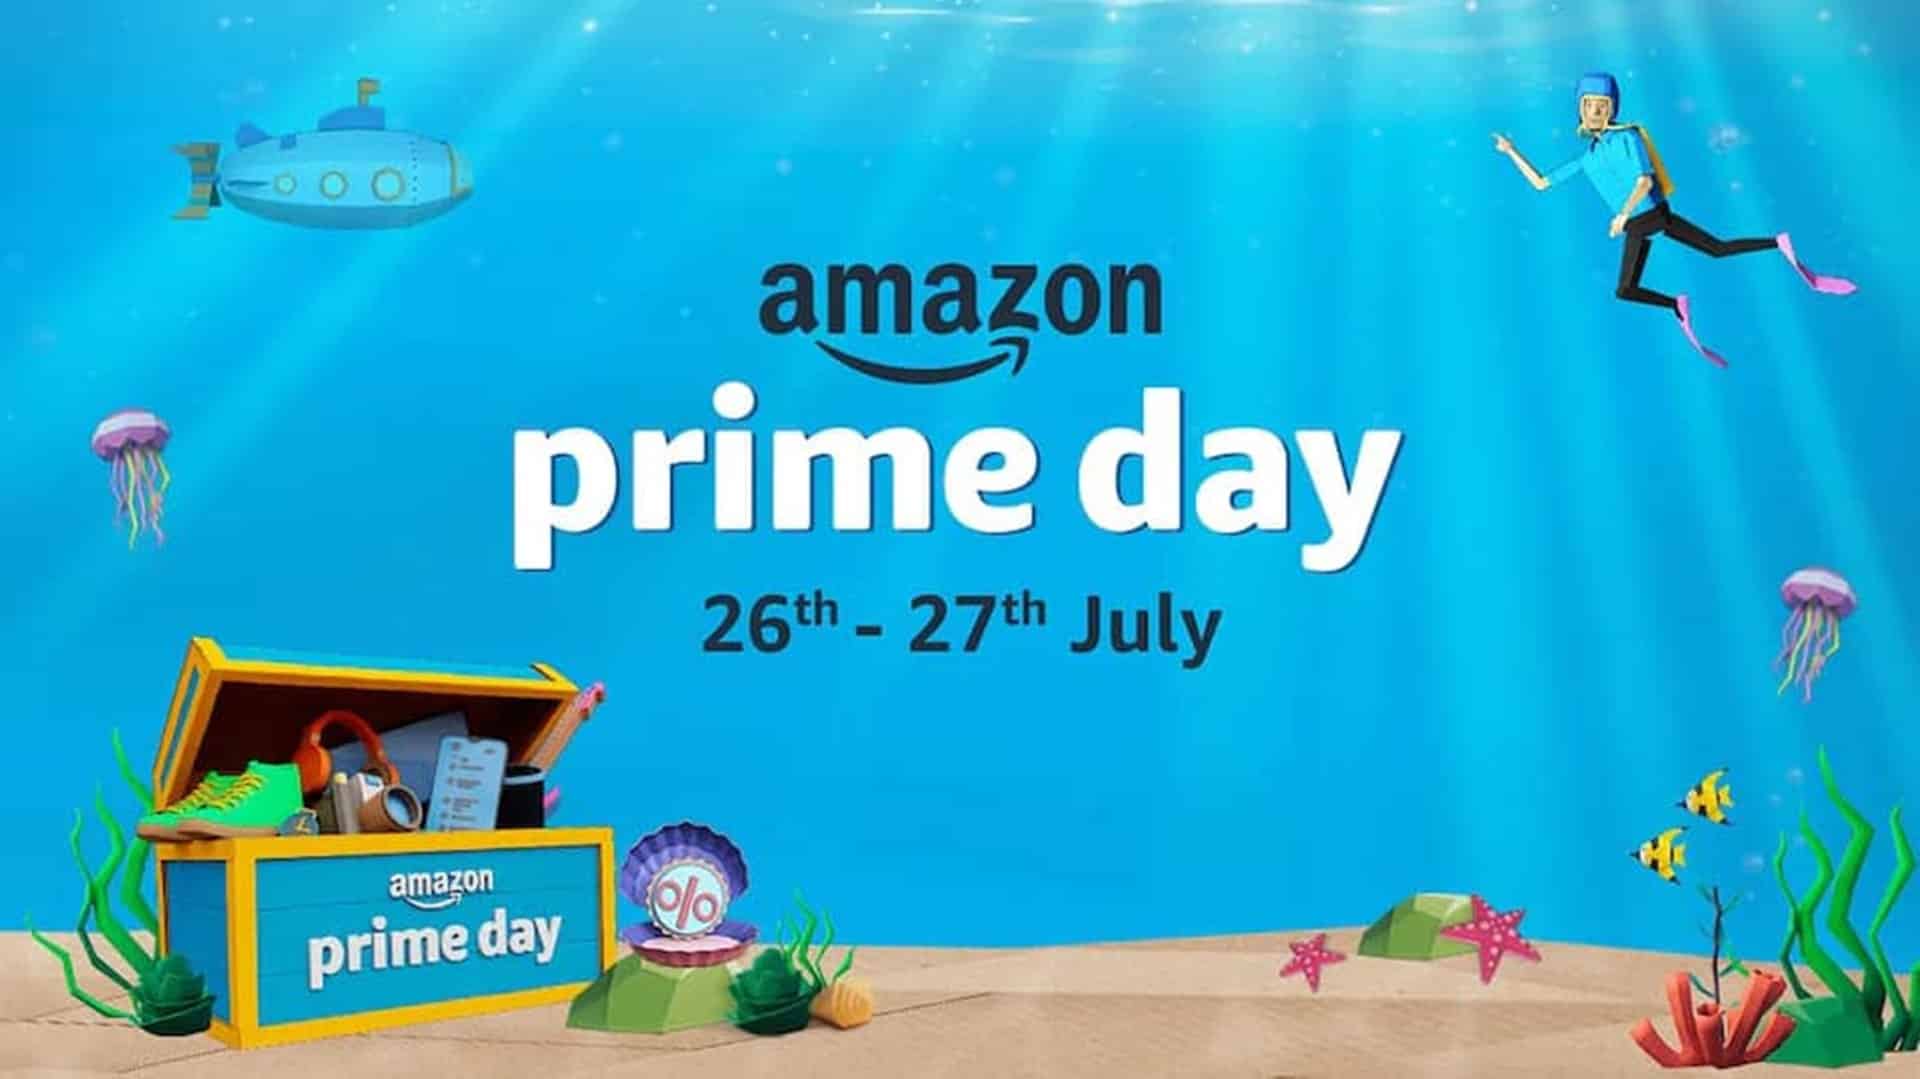 Prime members shopped from 1.26 lakh sellers in Prime Day sale: Amazon India